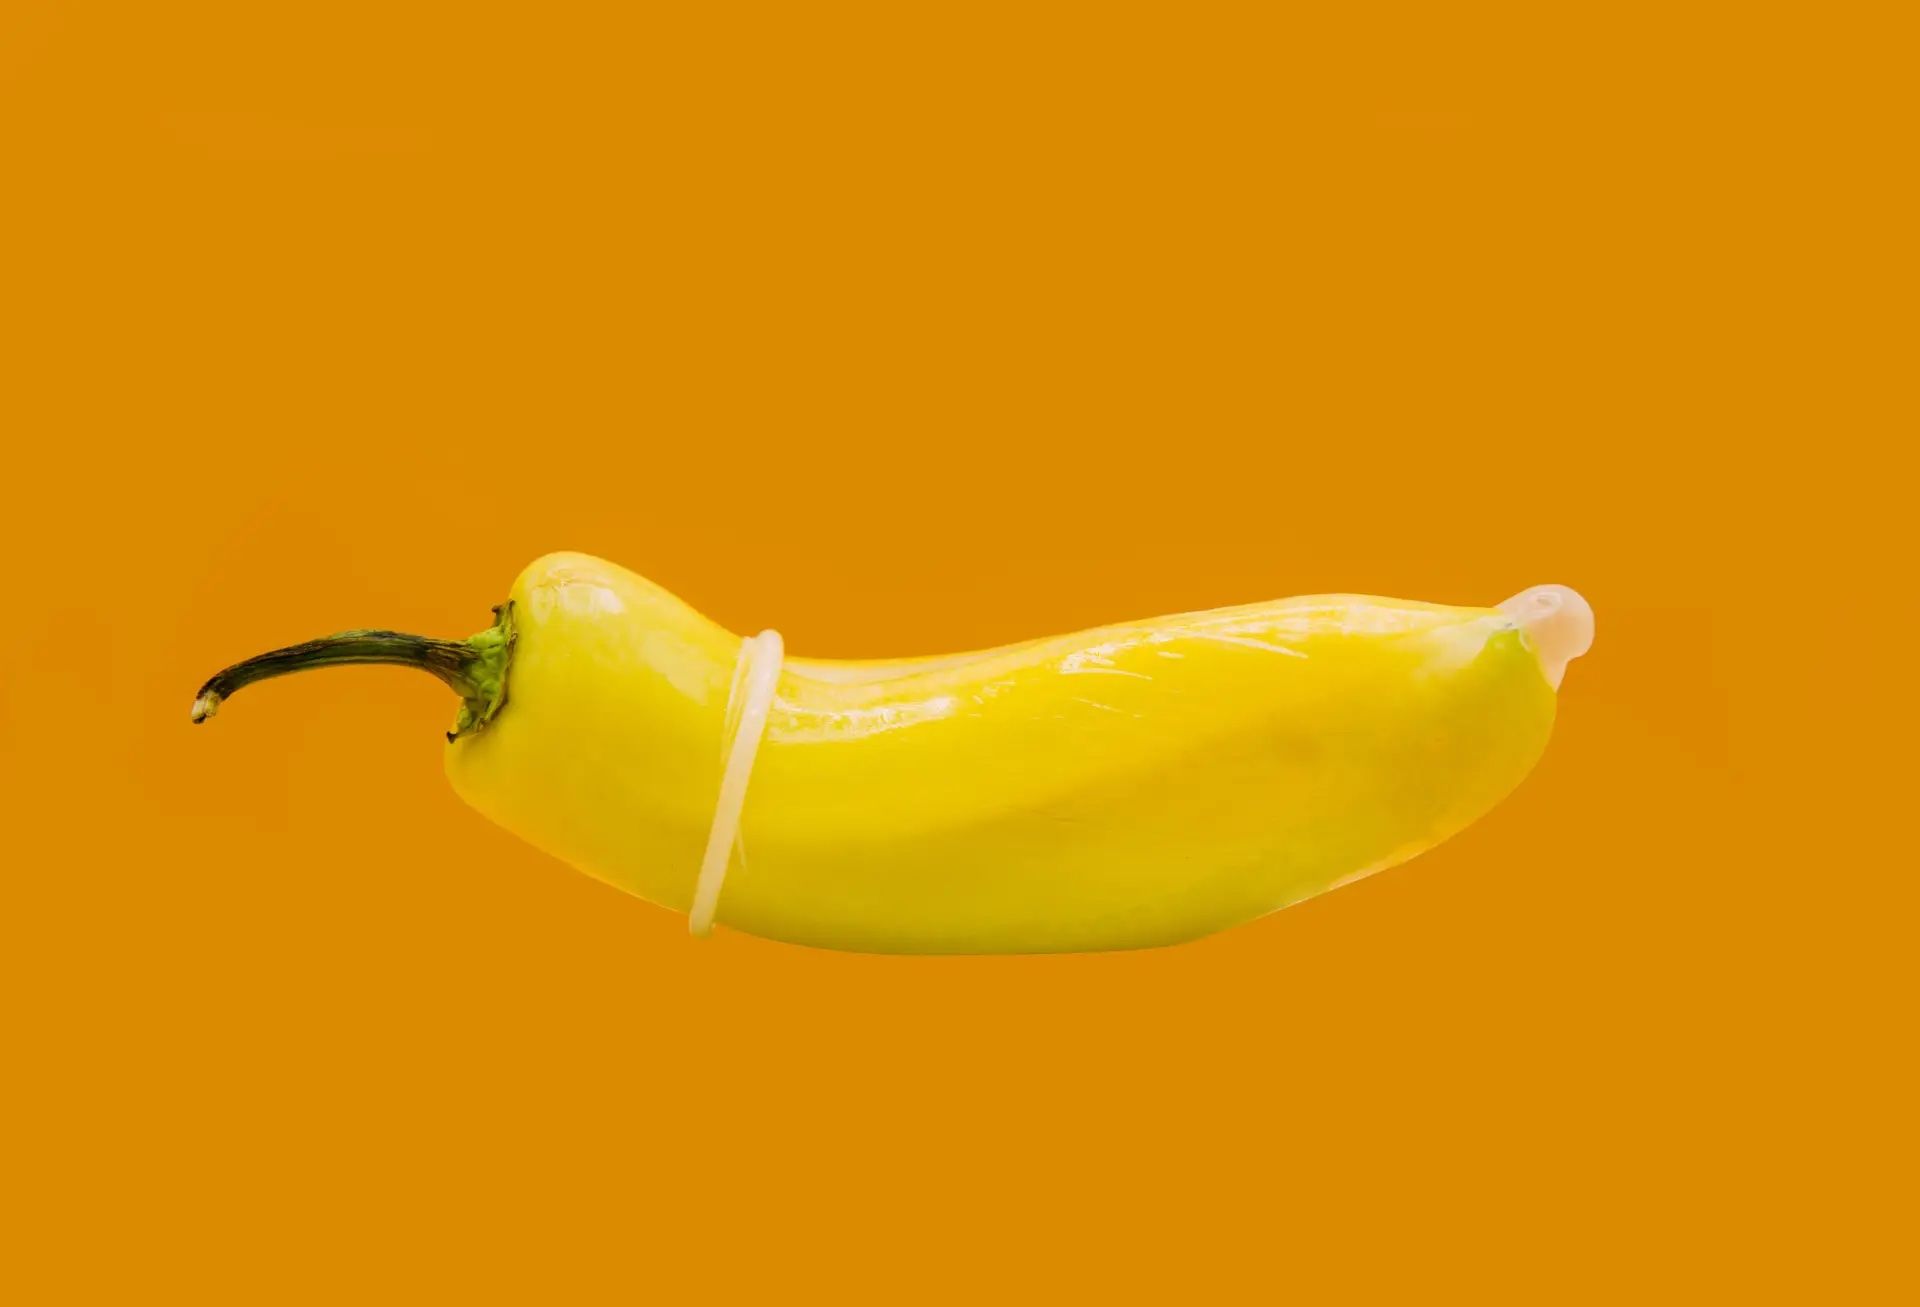 A yellow pepper wrapped in a condom on an orange background